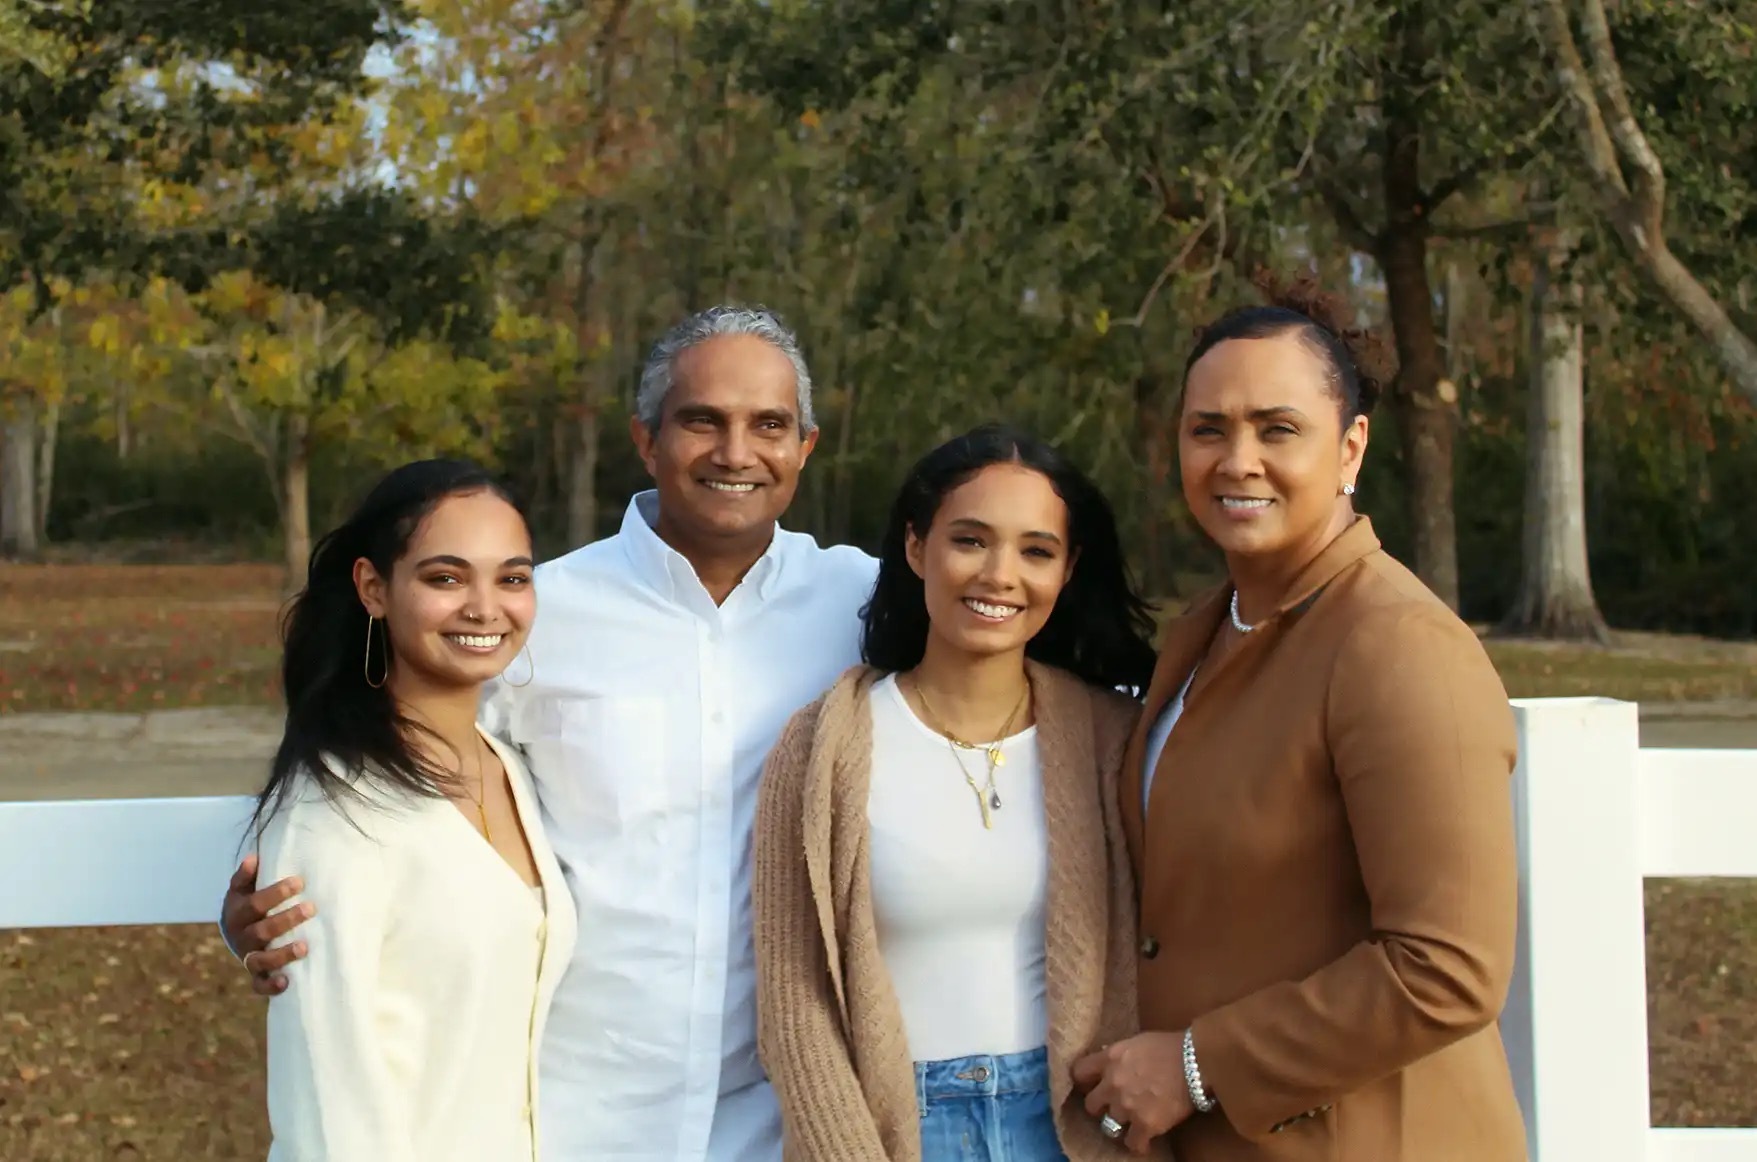 Family portrait with two college students leaning happily with their older parents.